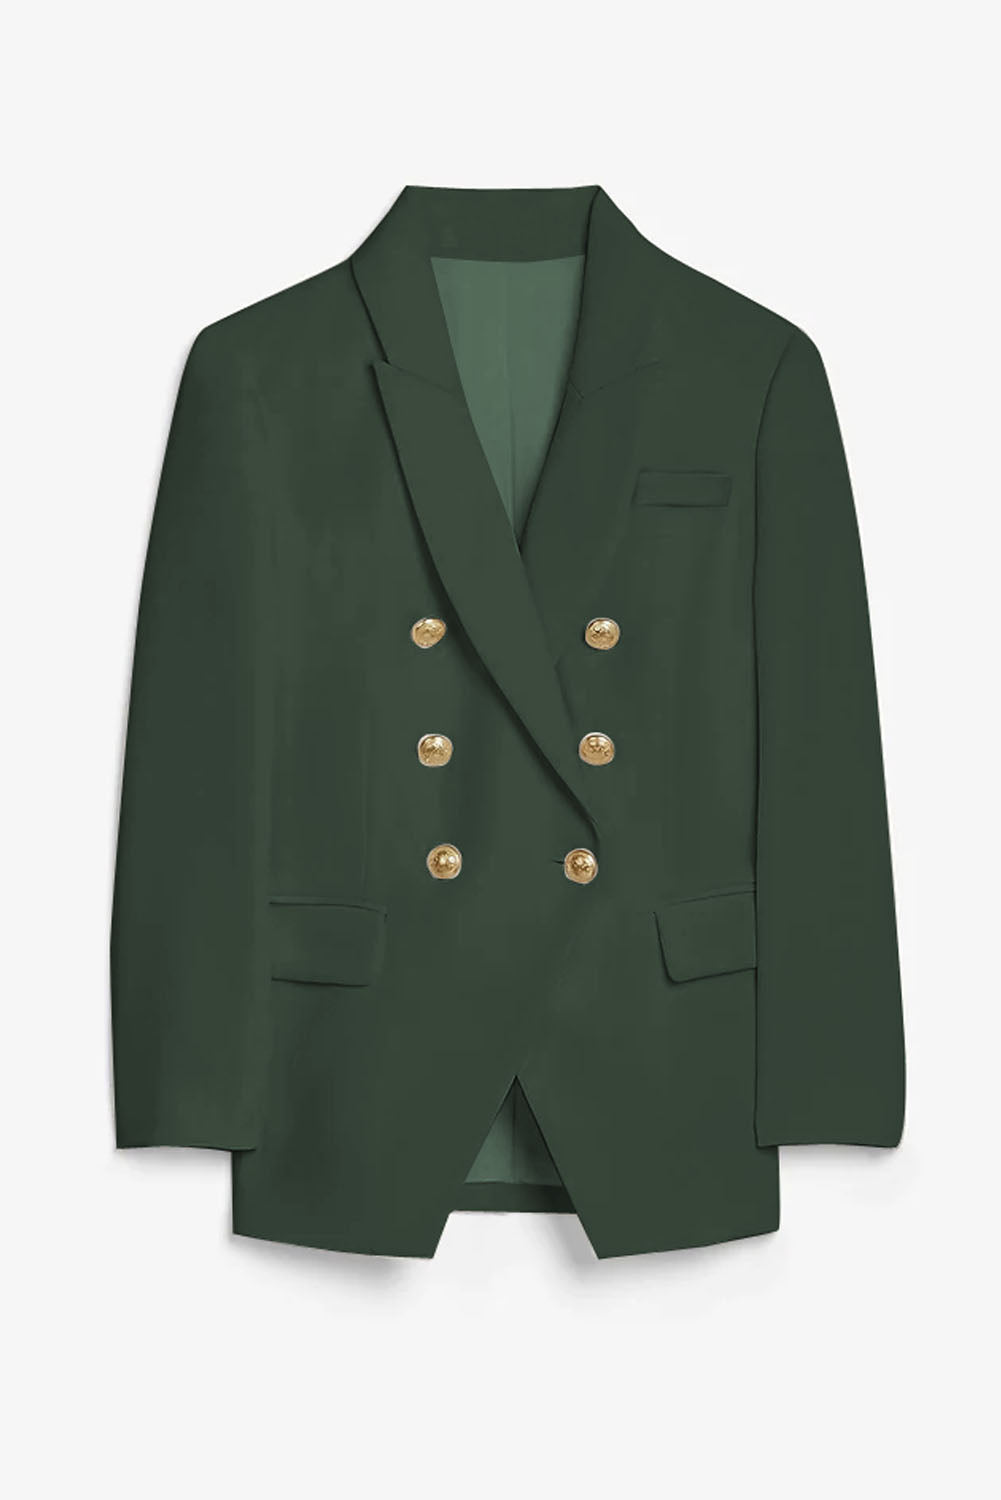 LC852446-209-S, LC852446-209-M, LC852446-209-L, LC852446-209-XL, LC852446-209-2XL, Green Womens Lapel Button Work Jackets Draped Open Front Work Suit